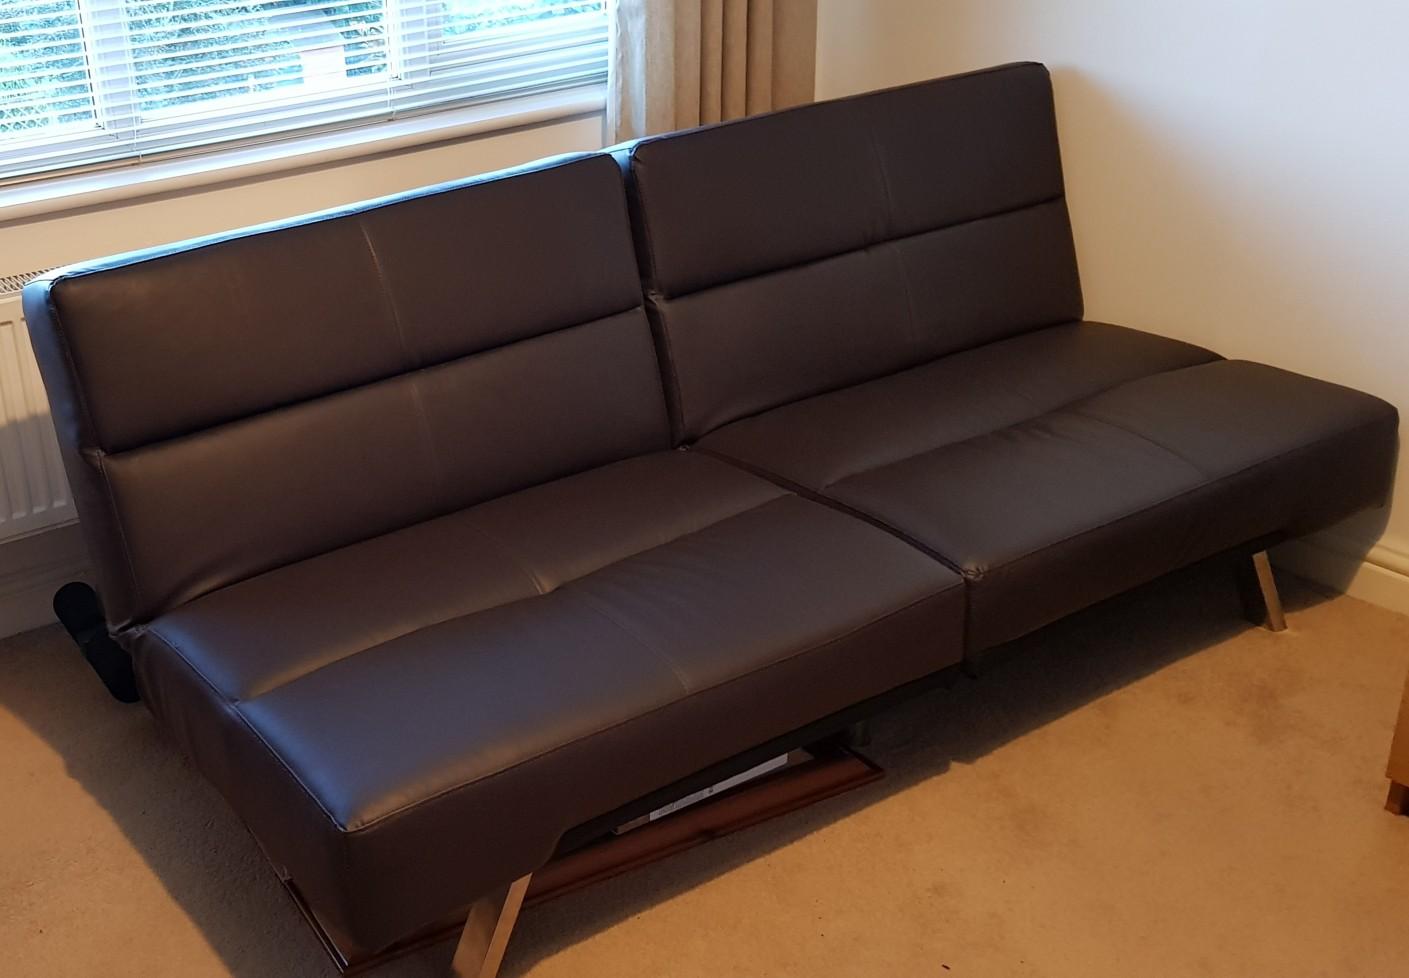 Asda brown faux click clack sofa bed in B98 Redditch for £50.00 for sale |  Shpock